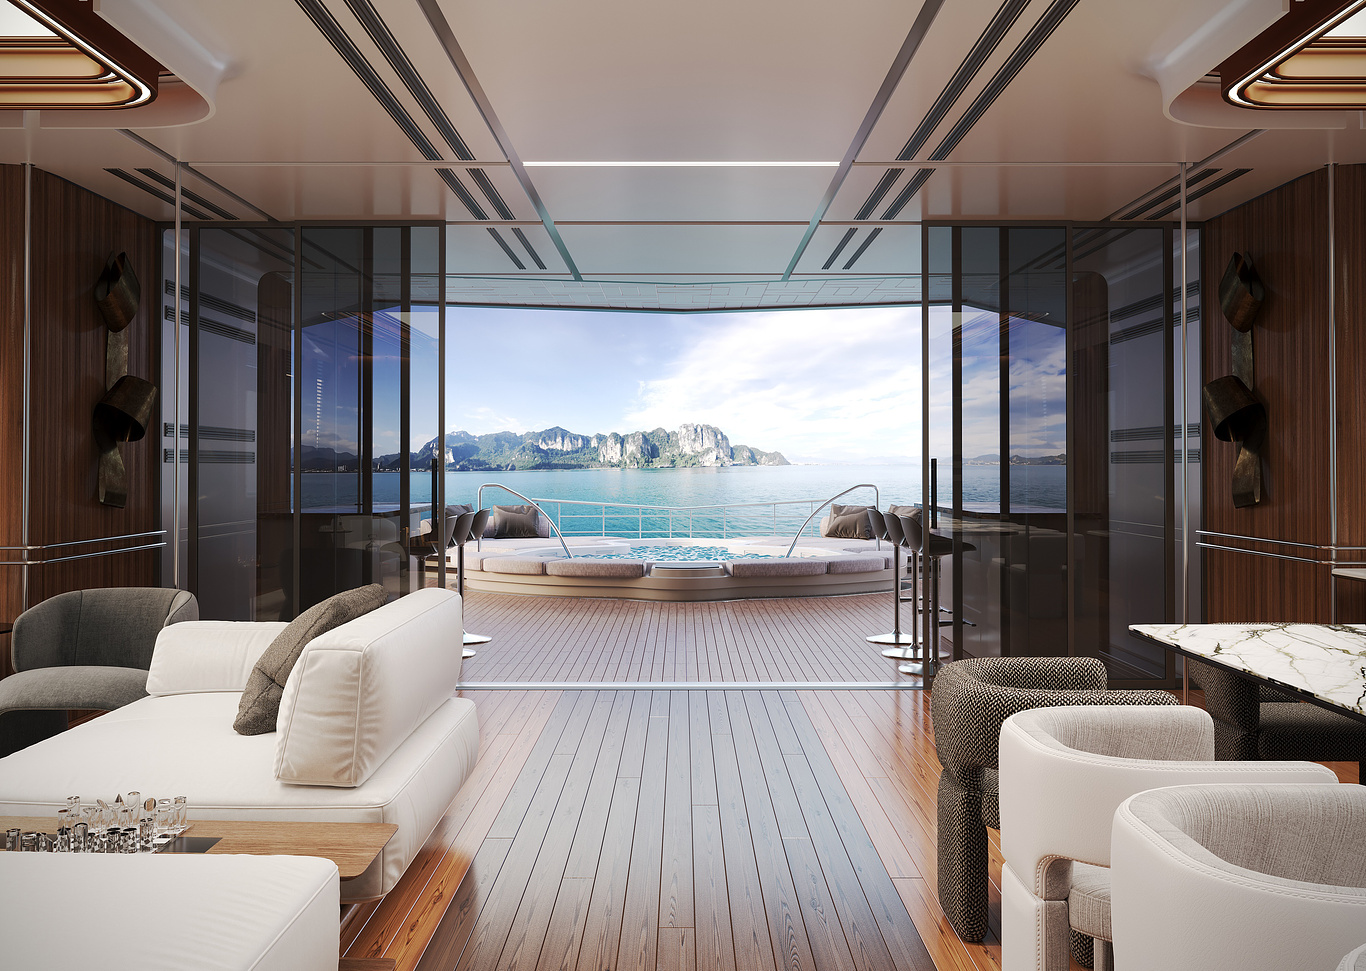 Nautical luxury: how we crafted the yacht interior